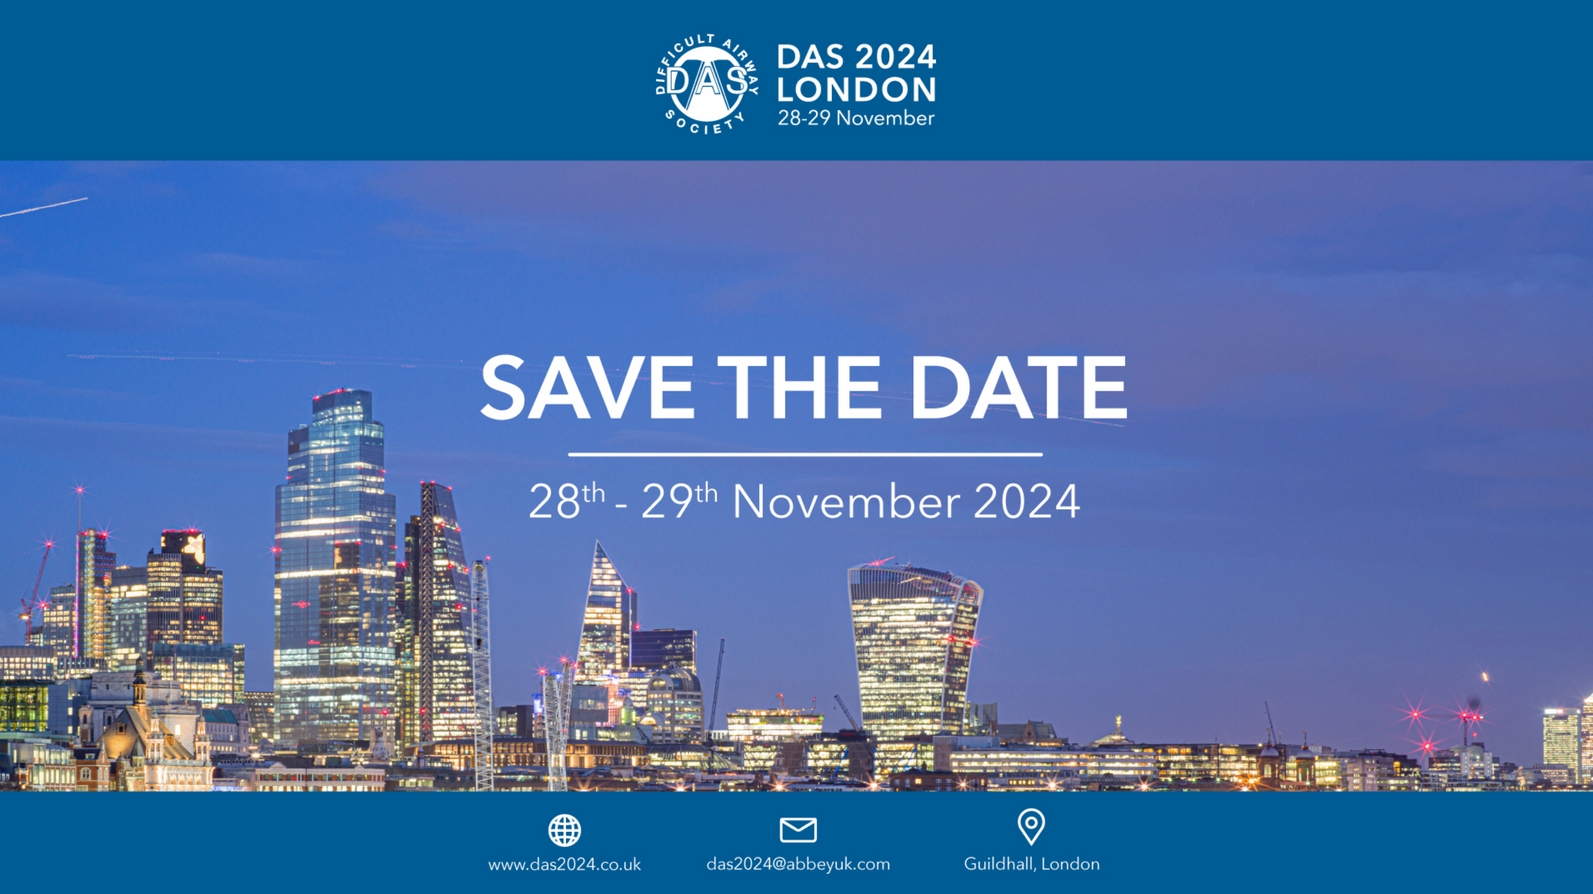 DAS 2024 - London. Save the Date